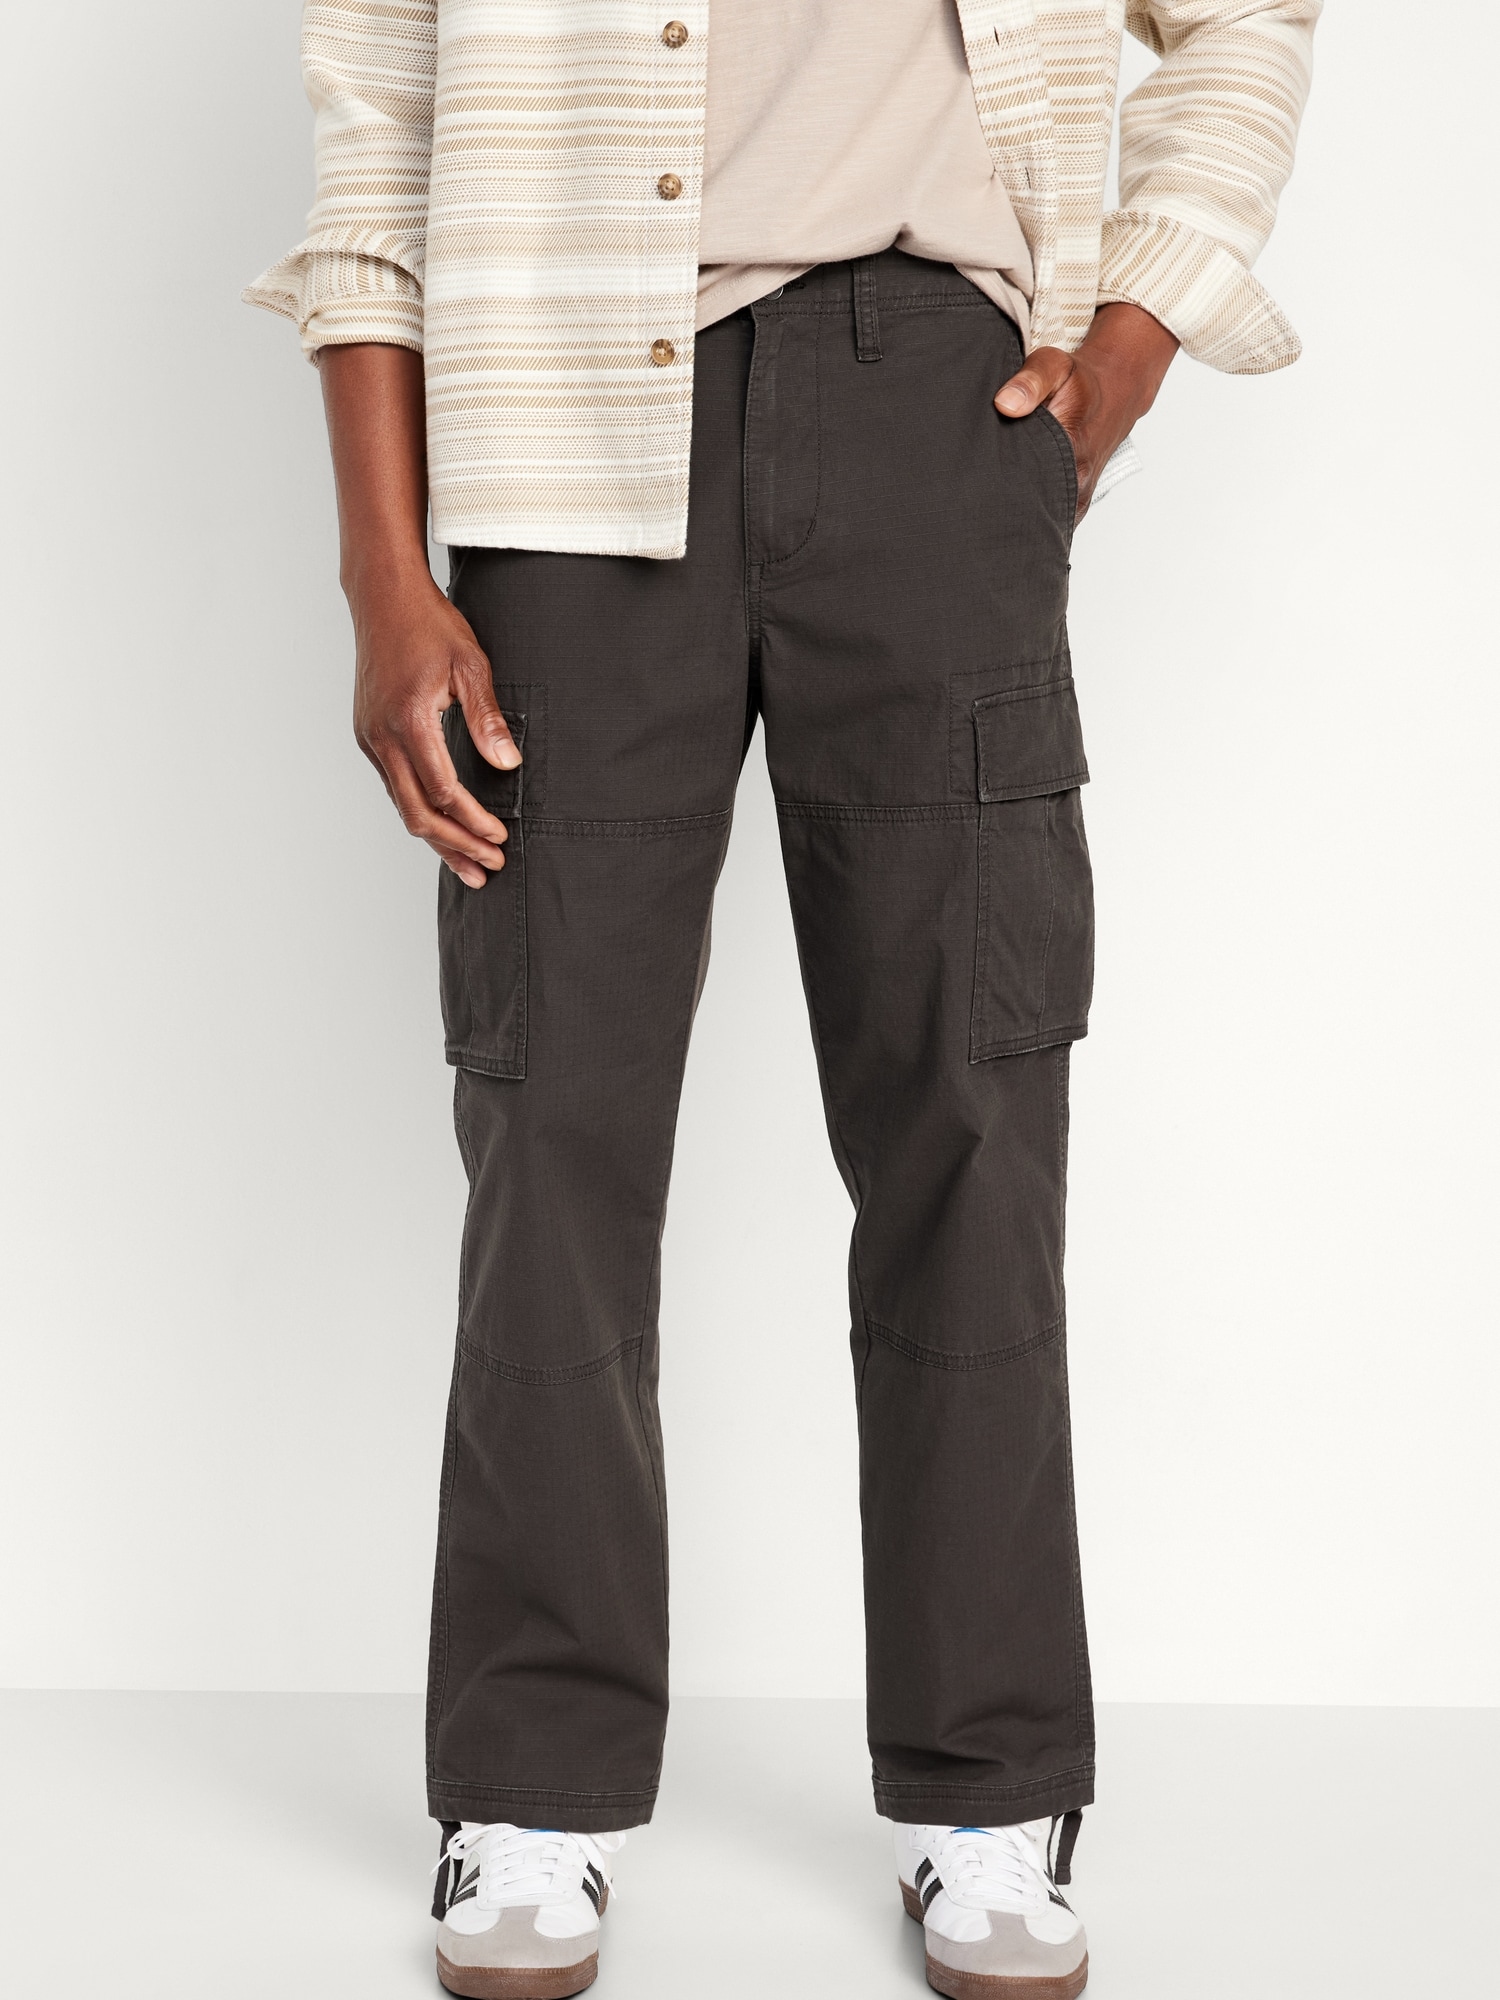 Relaxed Lived-In Cargo Shorts -- 10-inch inseam